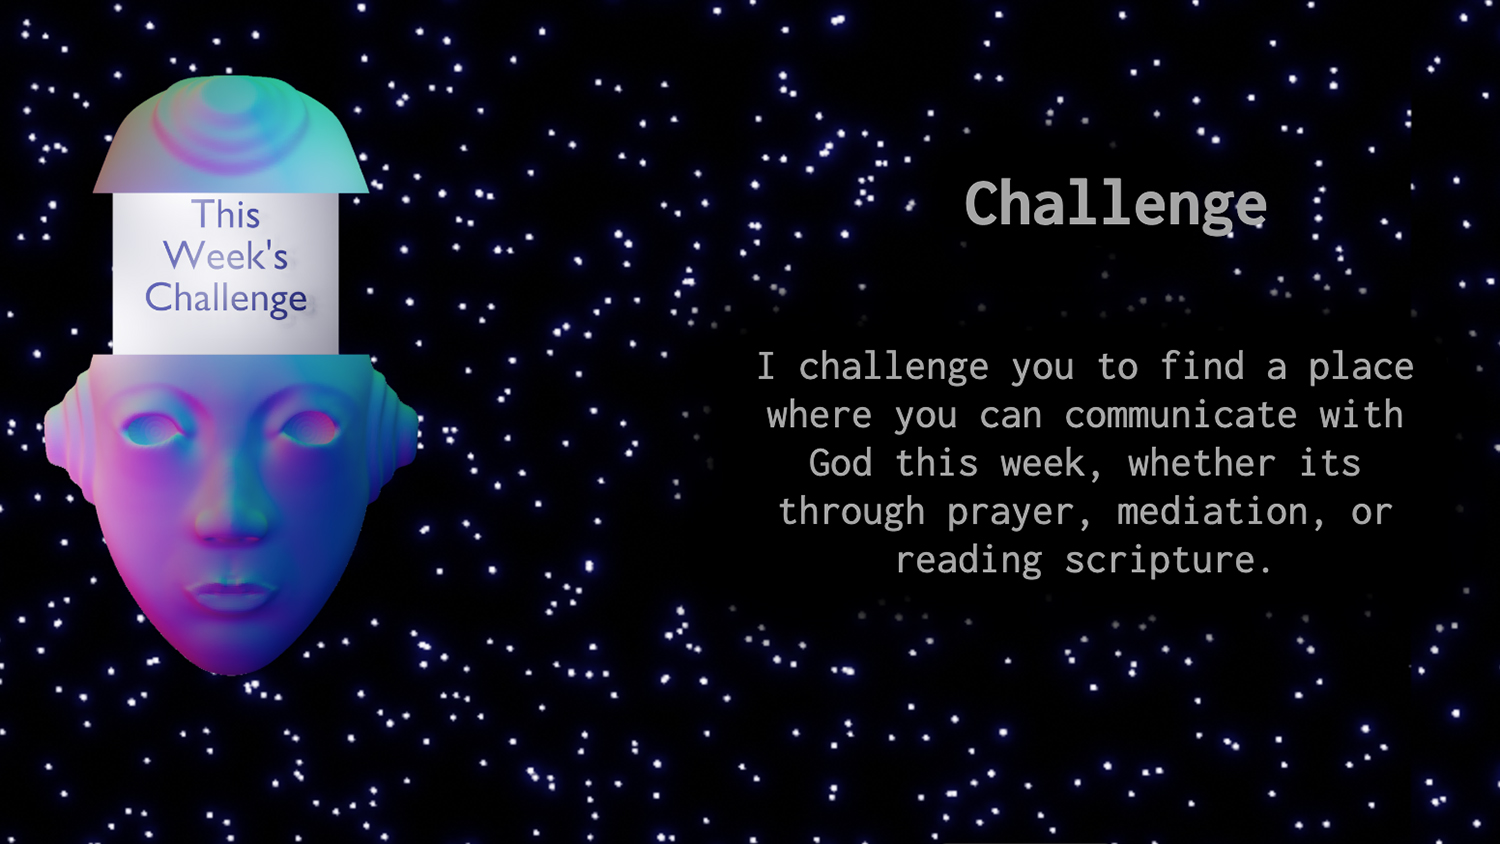 Robo Rabbi offers weekly challenges based on the Torah reading. Screengrab